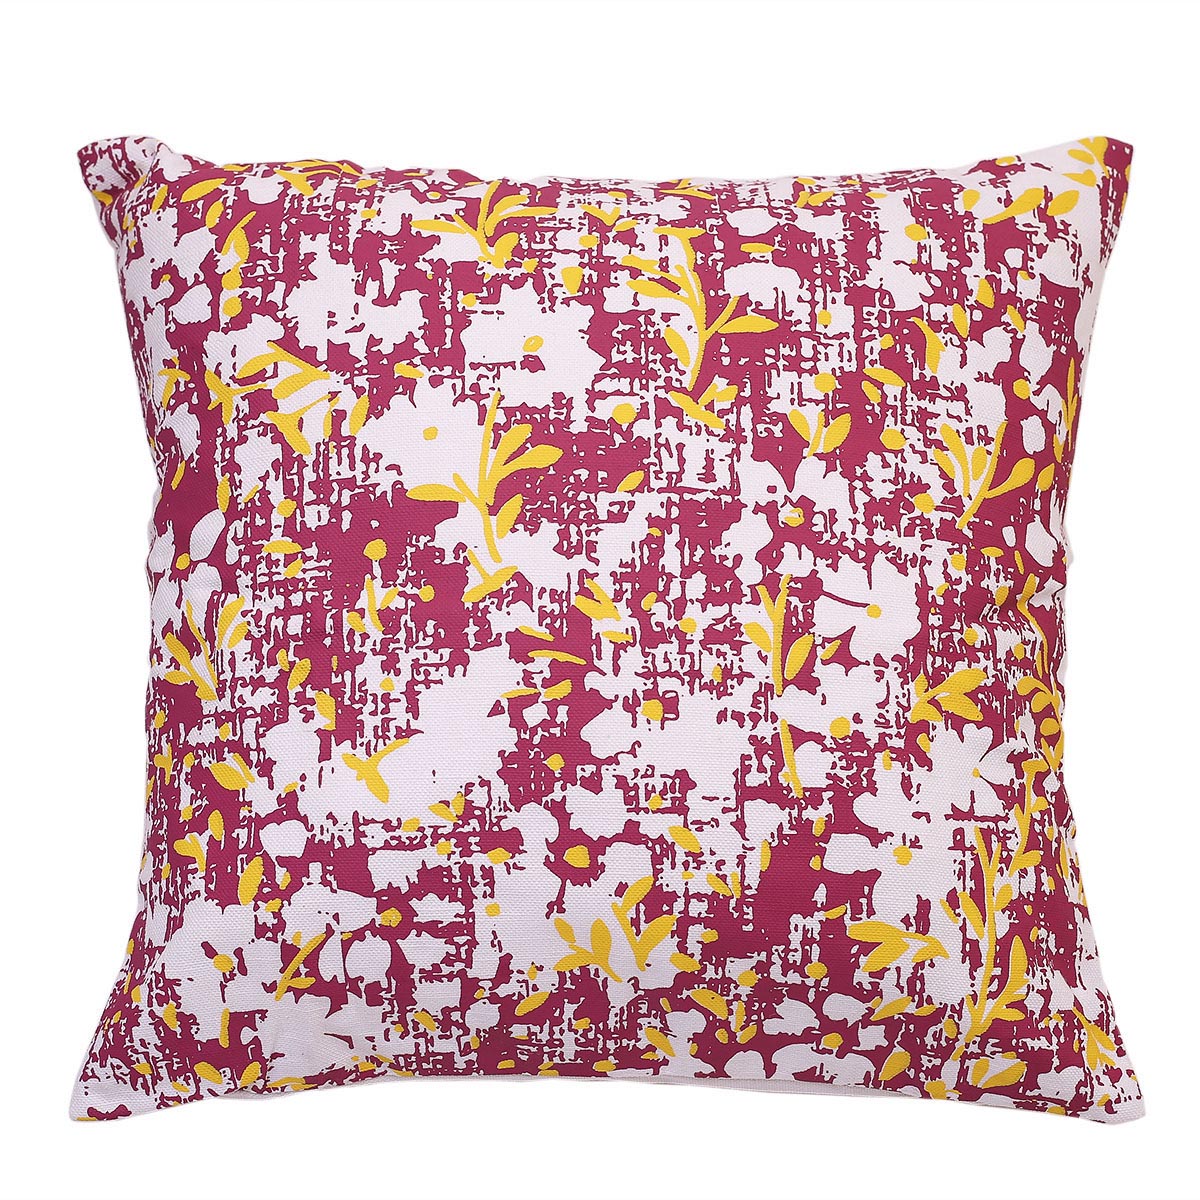 Scattered Petals Cushion Cover 16x16 Wht